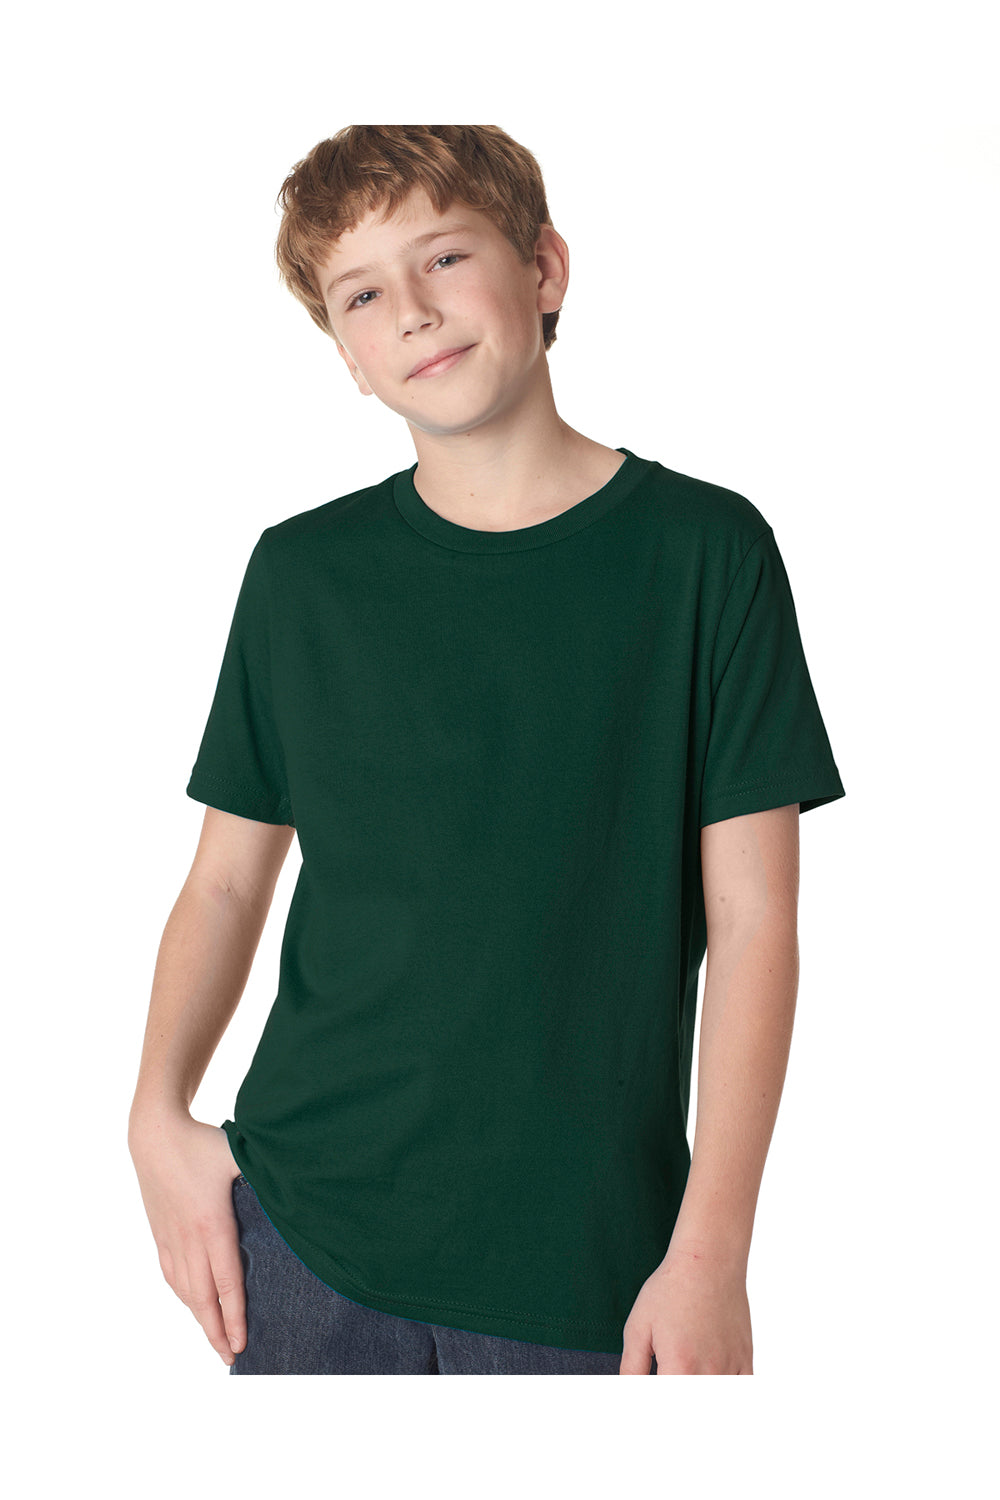 Next Level 3310 Youth Fine Jersey Short Sleeve Crewneck T-Shirt Forest Green Front